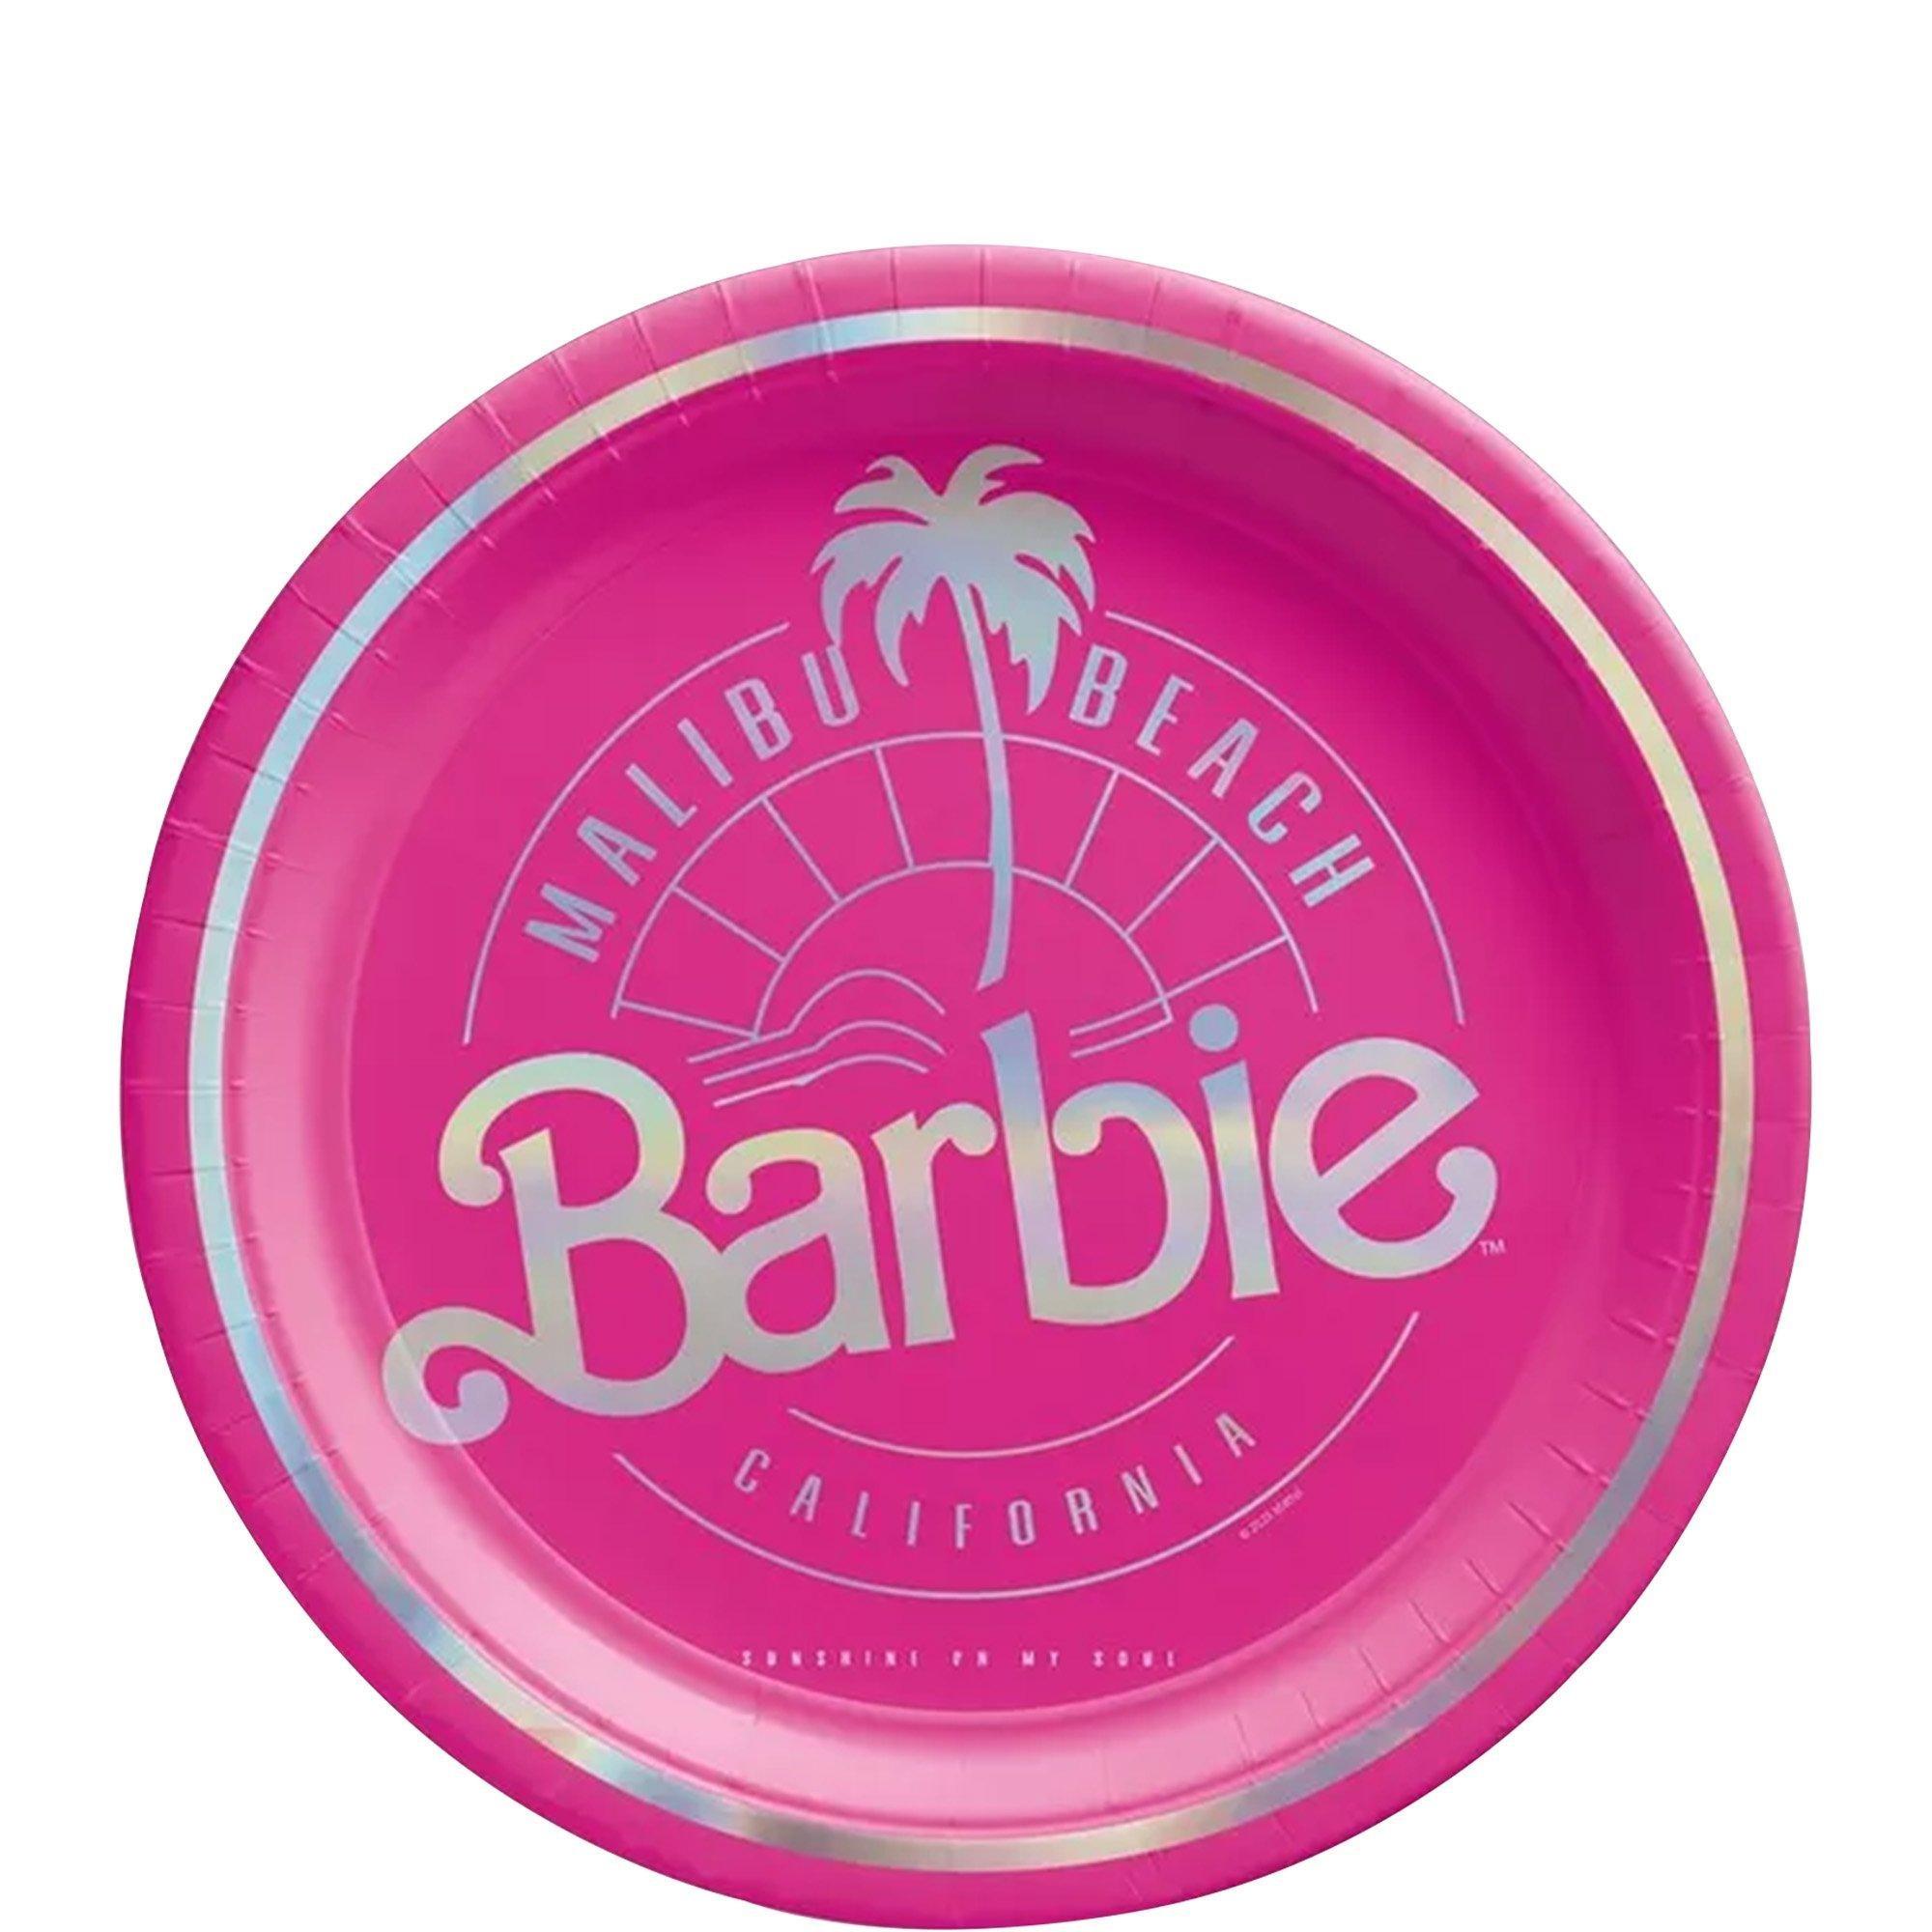 Malibu Barbie Party Kit for Guests